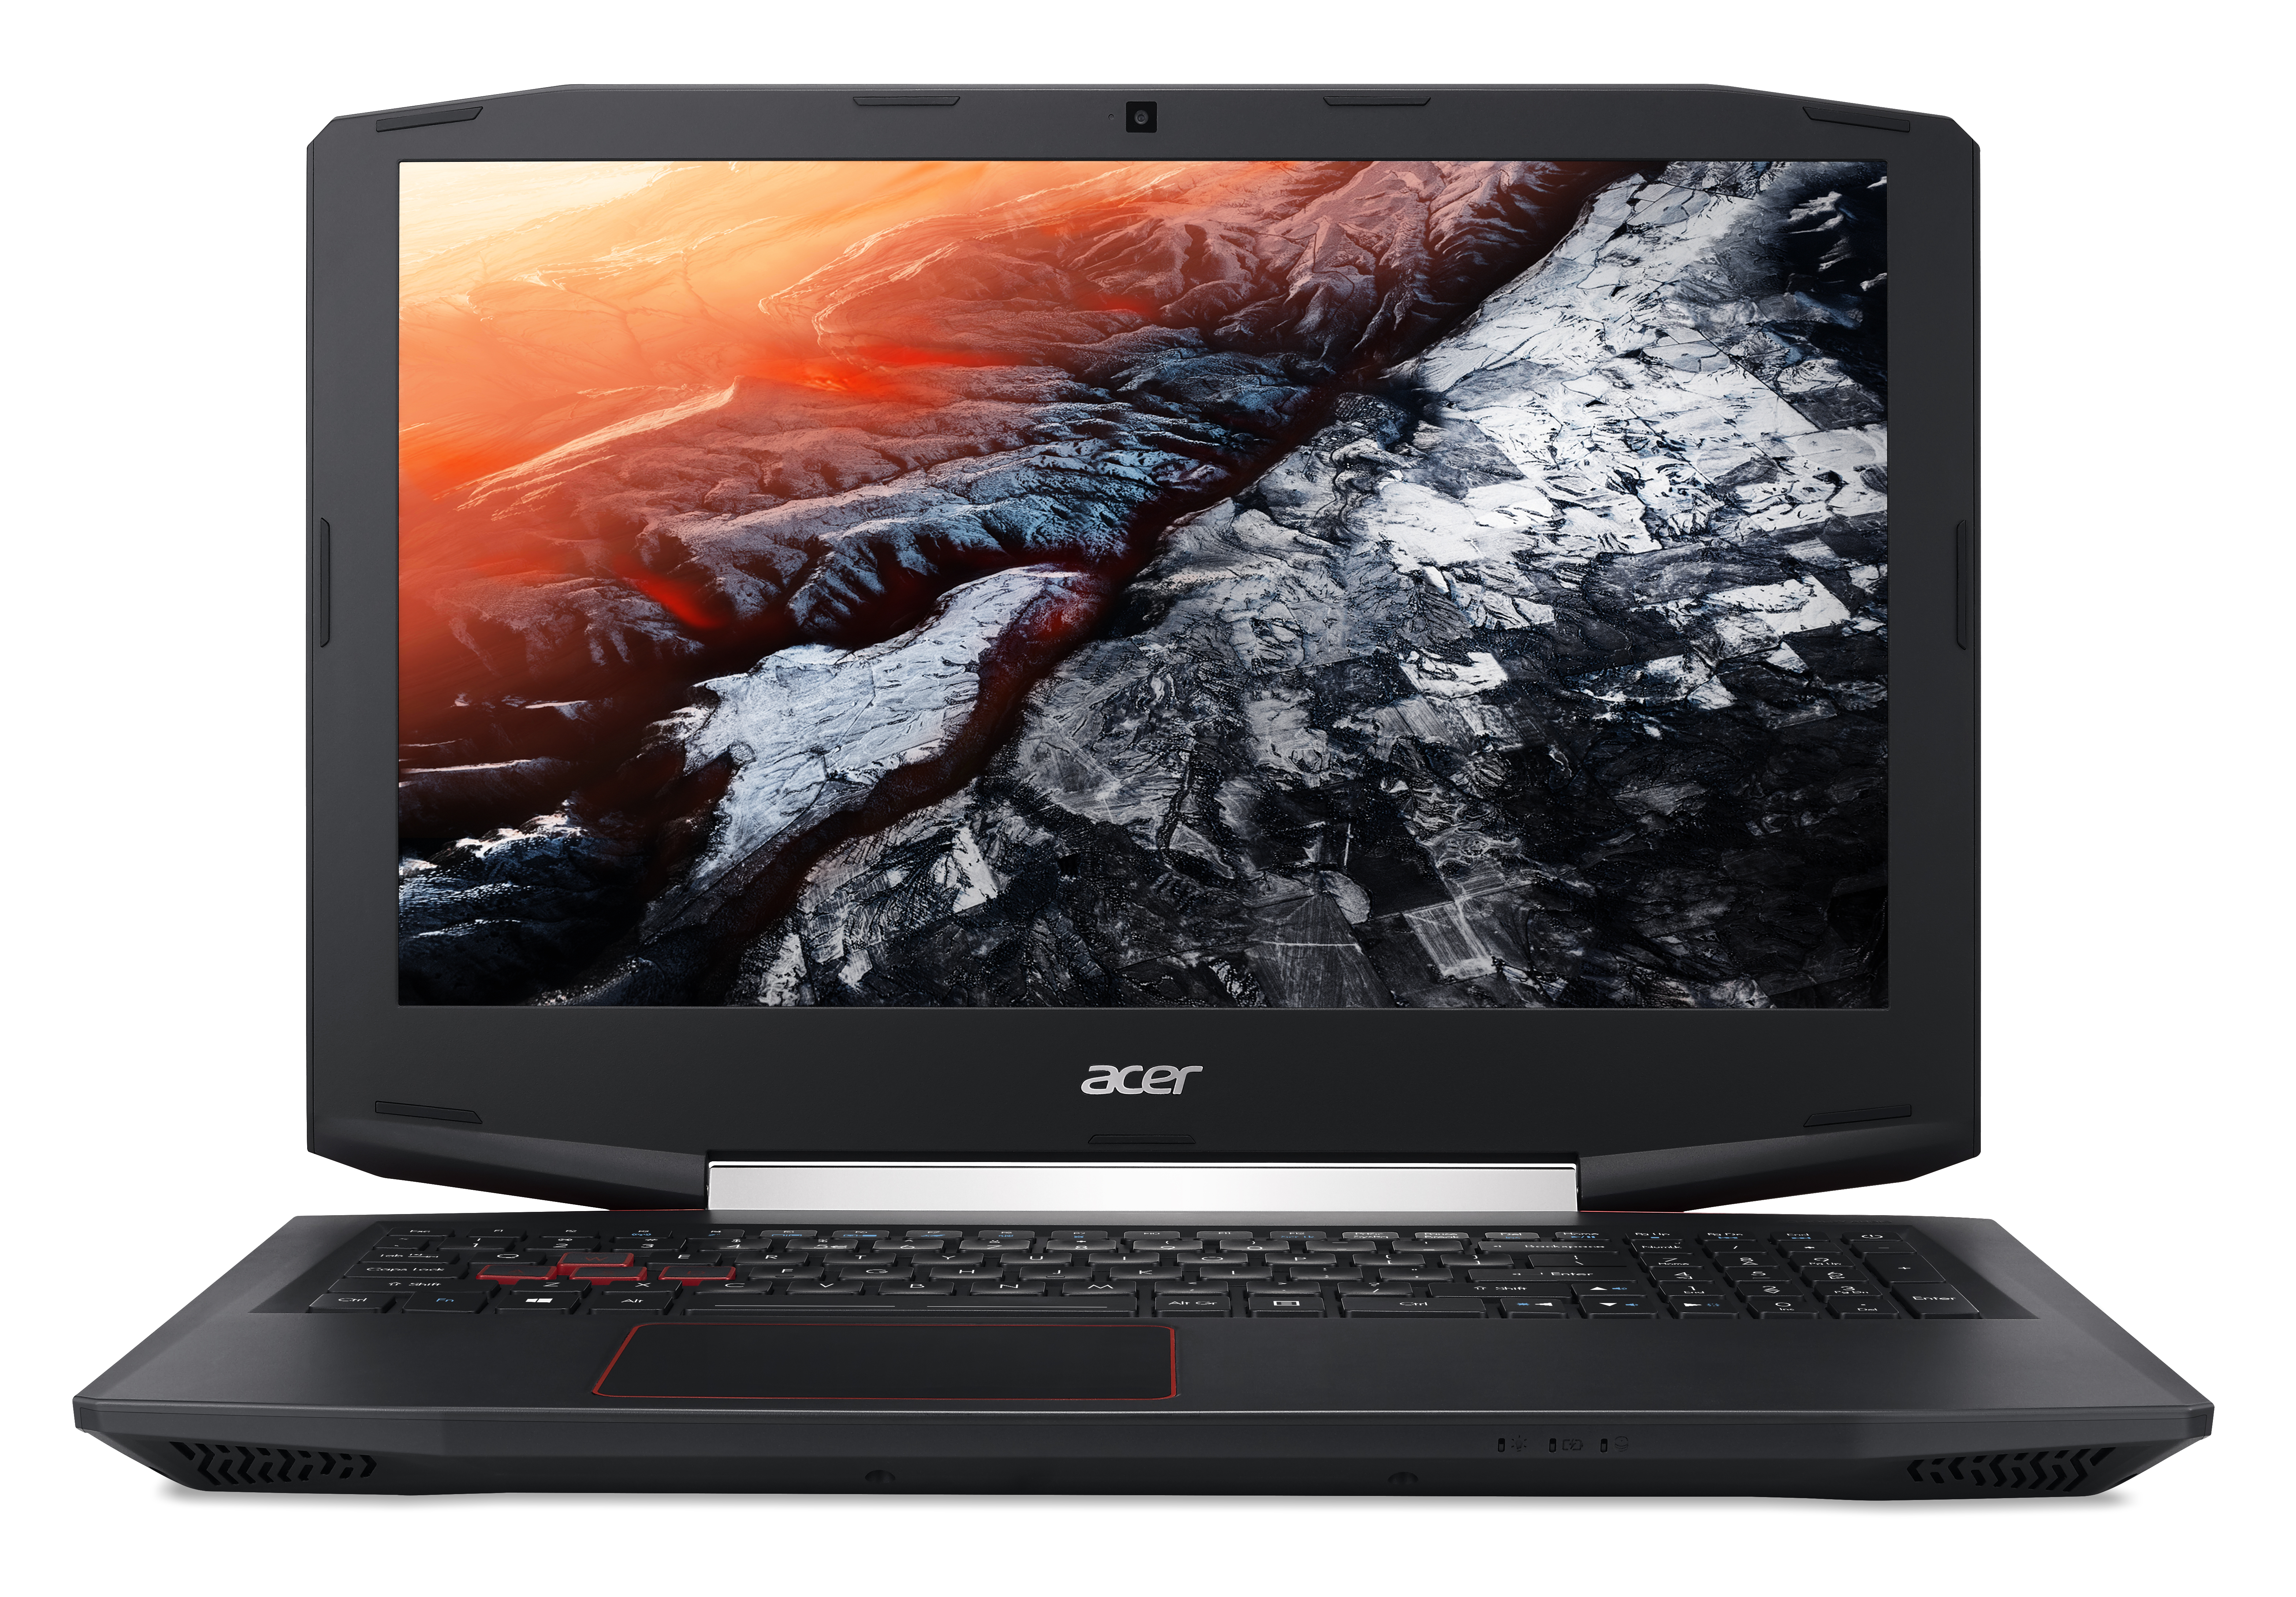 The Acer Aspire VX powered by Windows 10